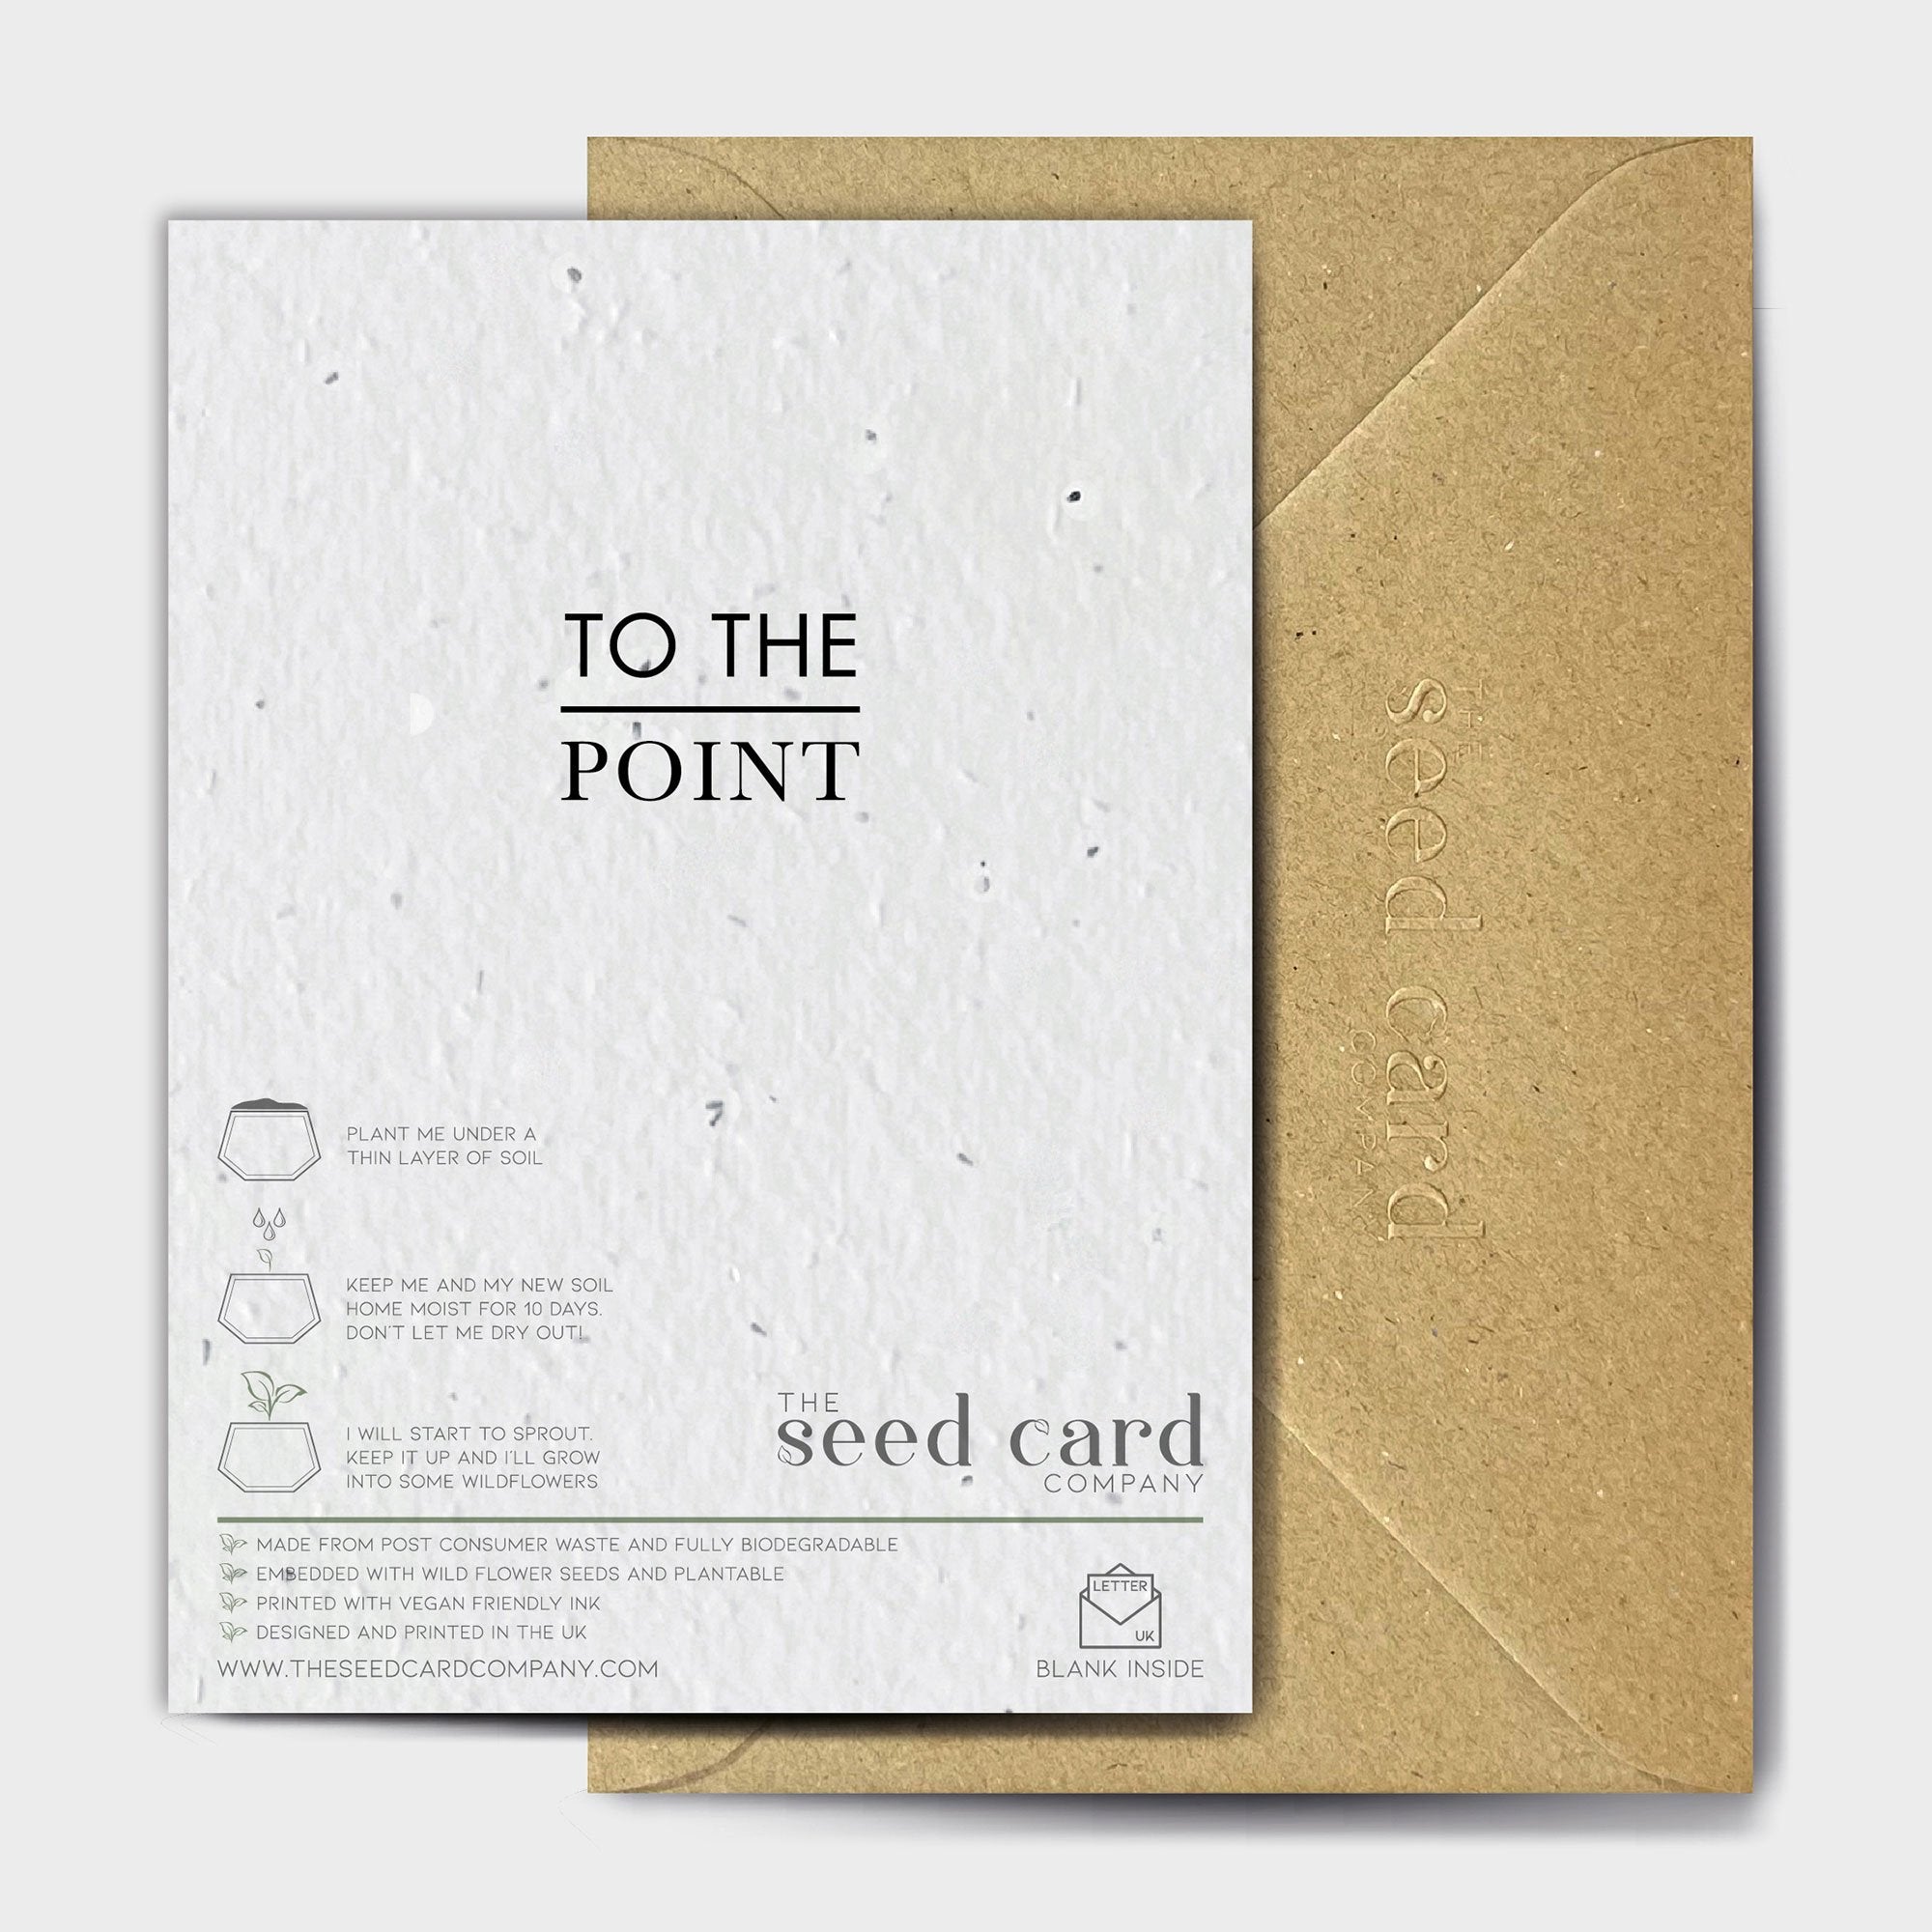 Shop online Just Another Sunday - 100% biodegradable seed-embedded cards Shop -The Seed Card Company